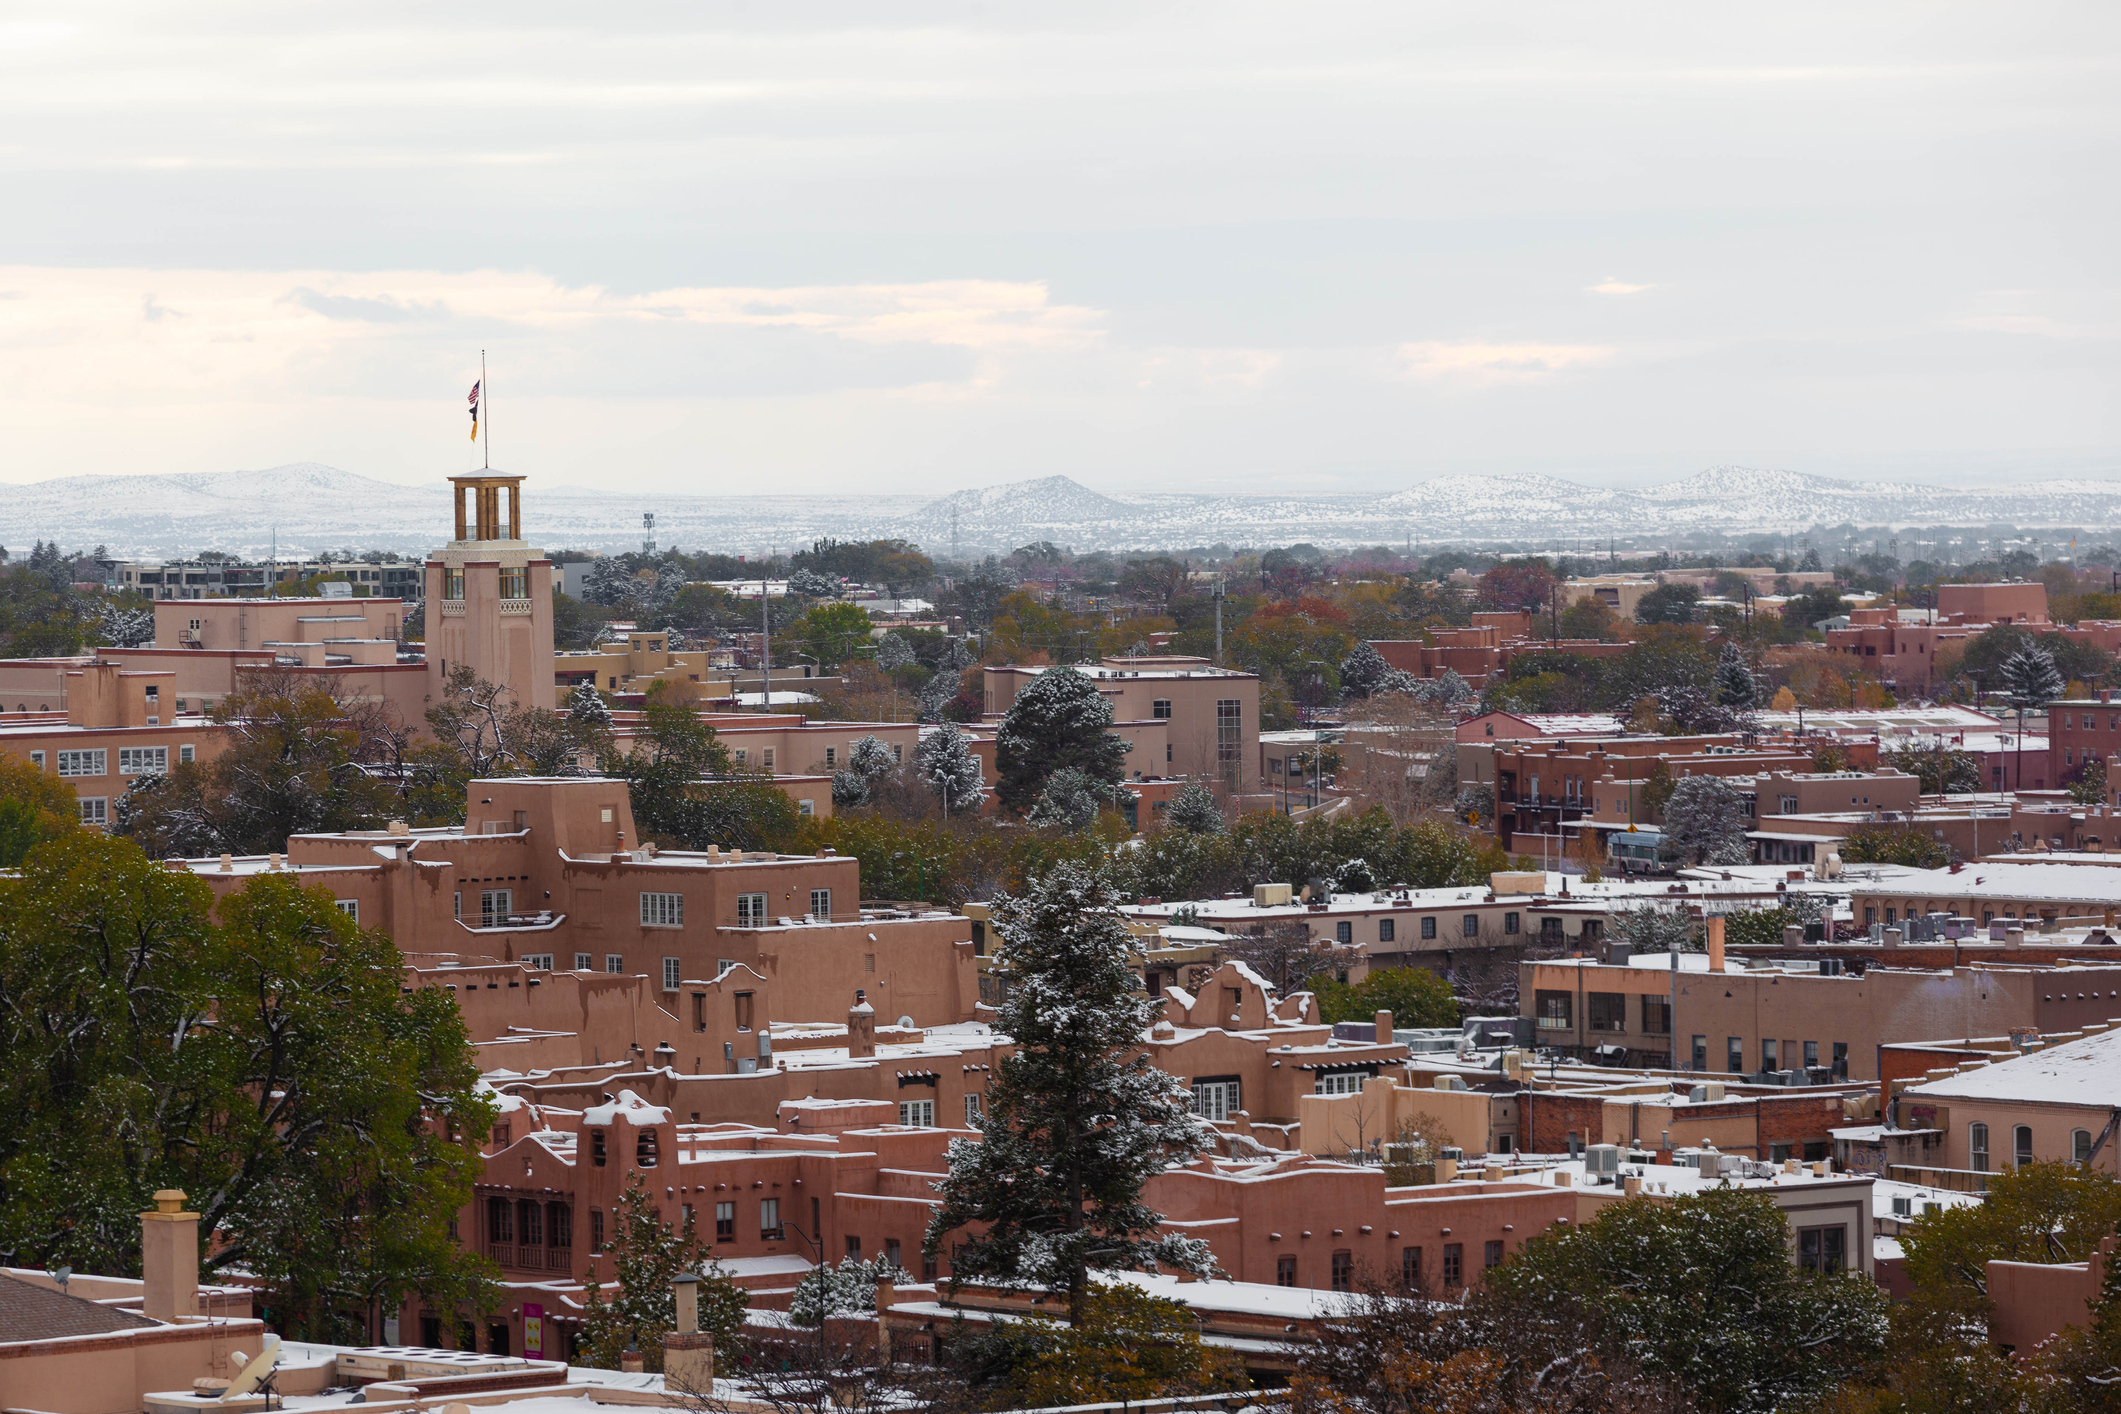 Snow covers the rooftops of adobe buildings